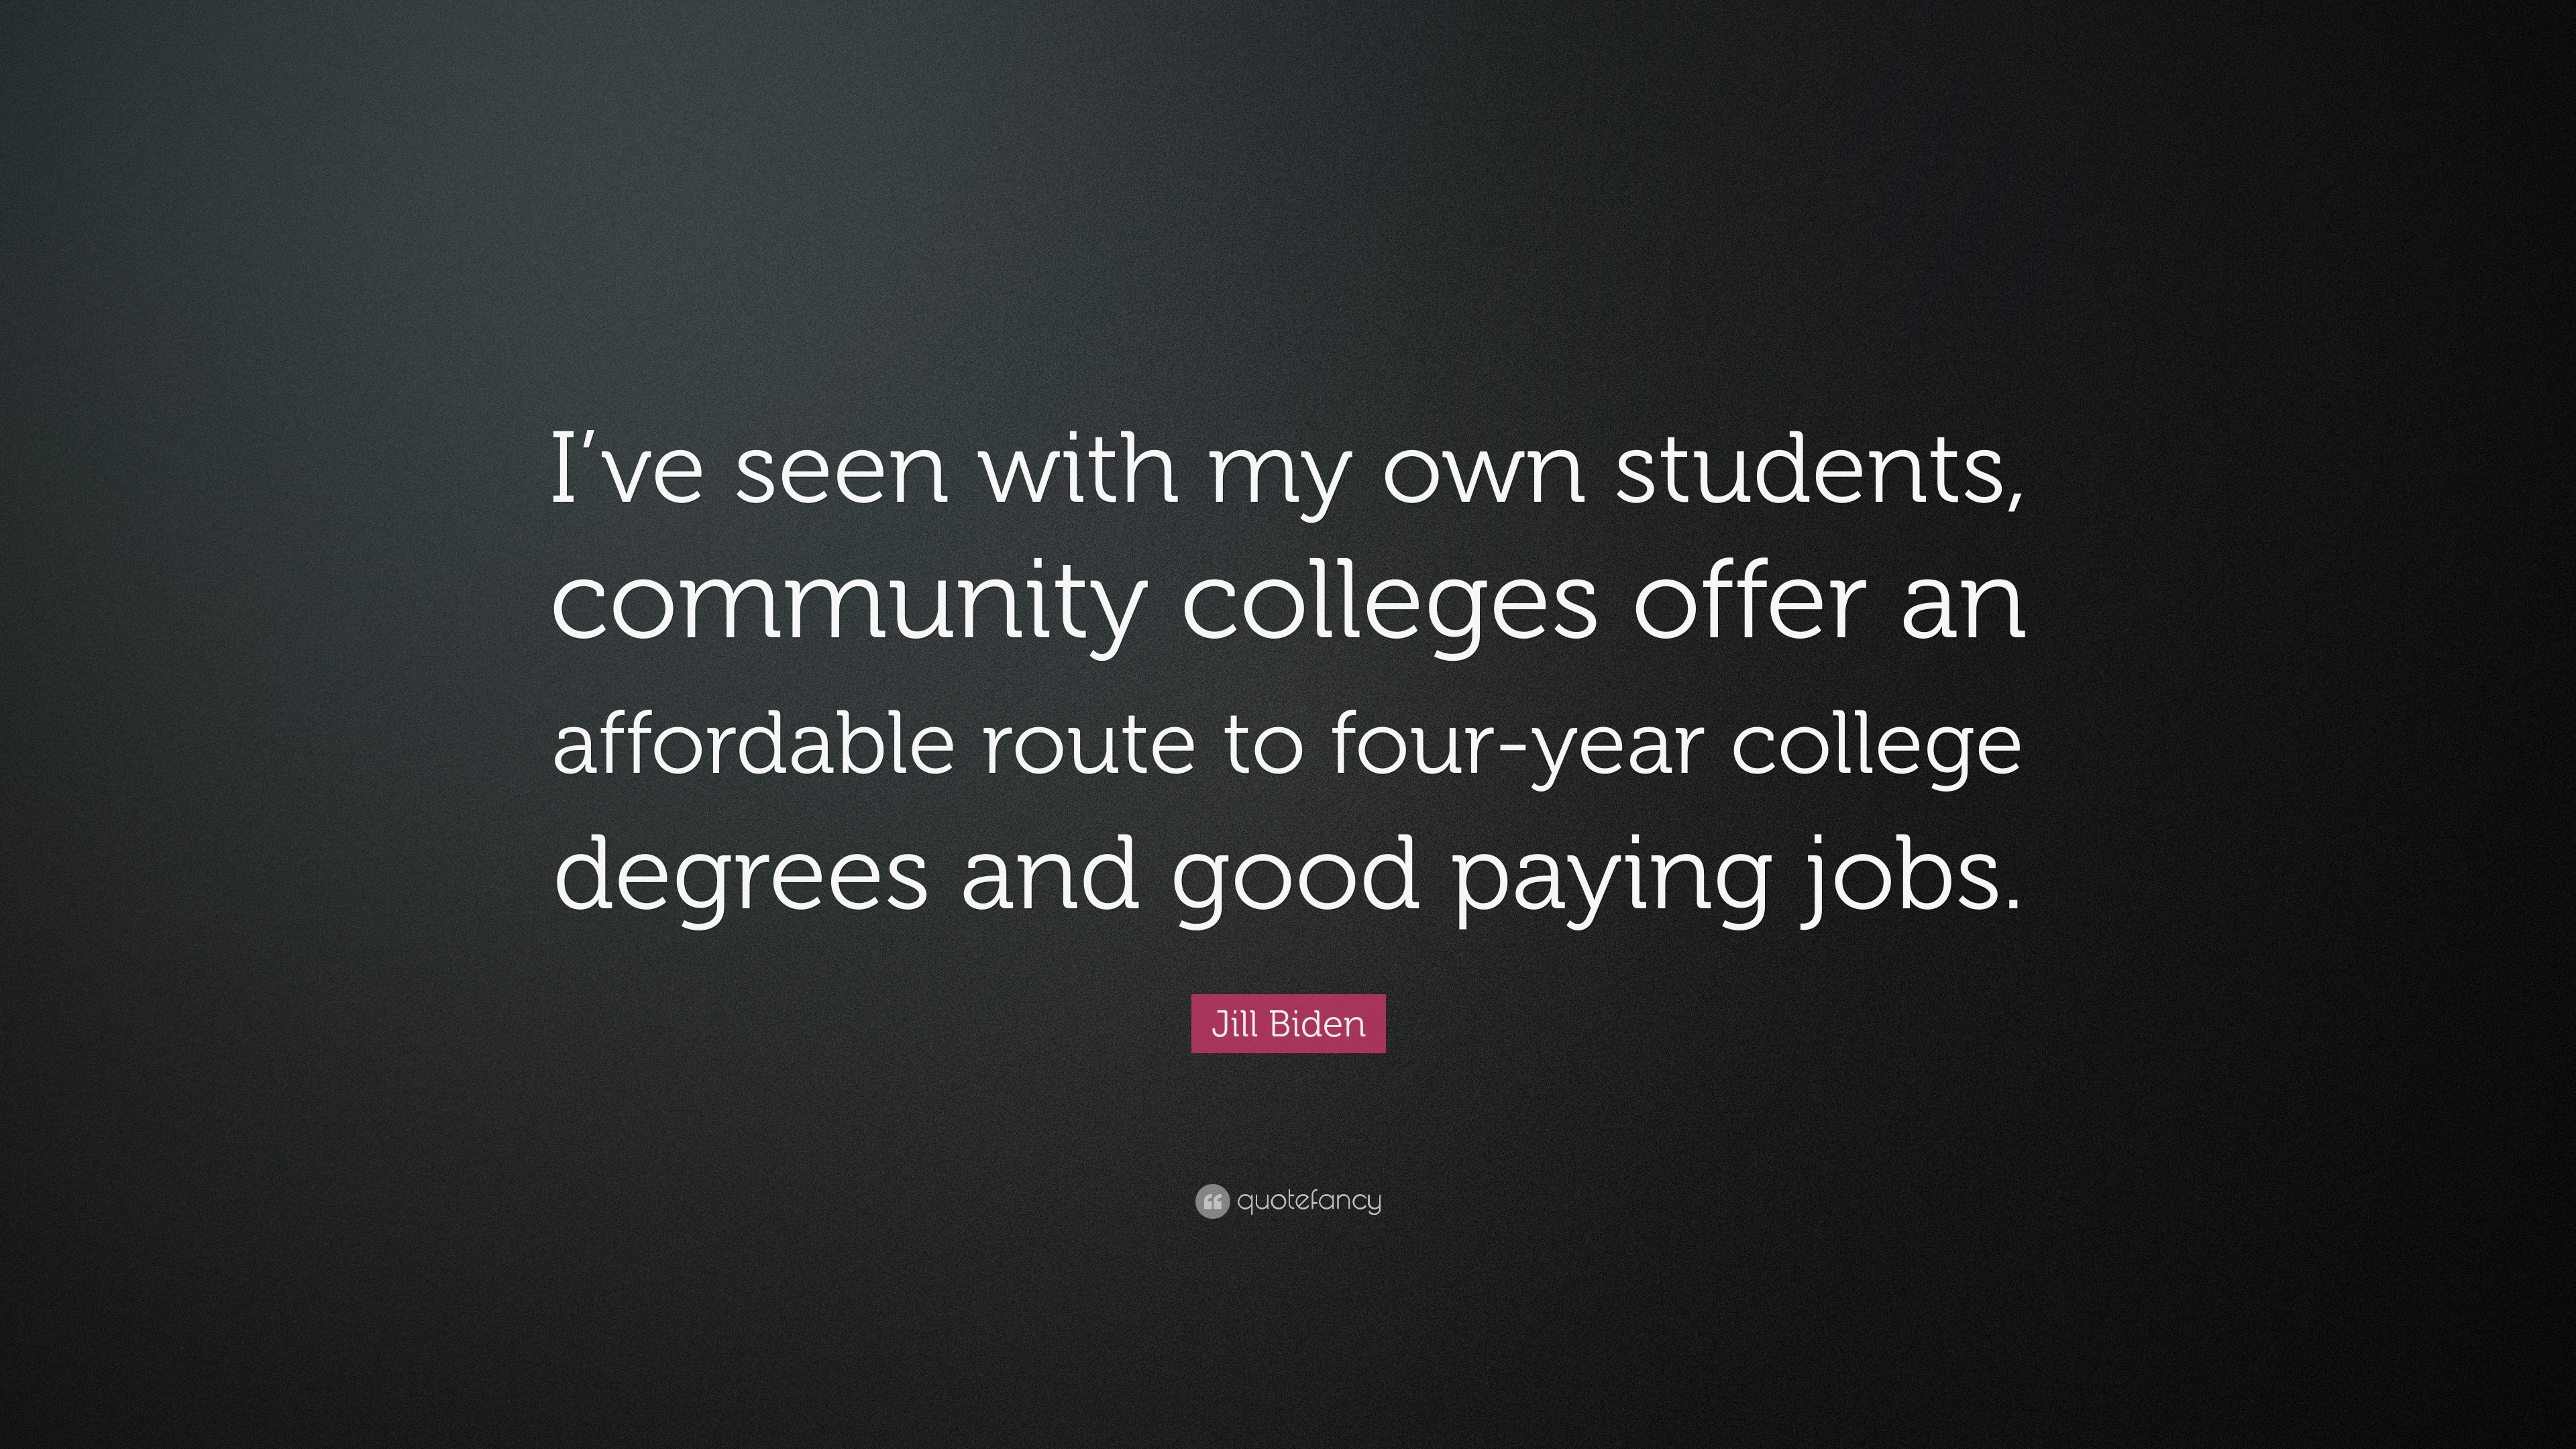 Jill Biden Quote: “I've seen with my own students, community 